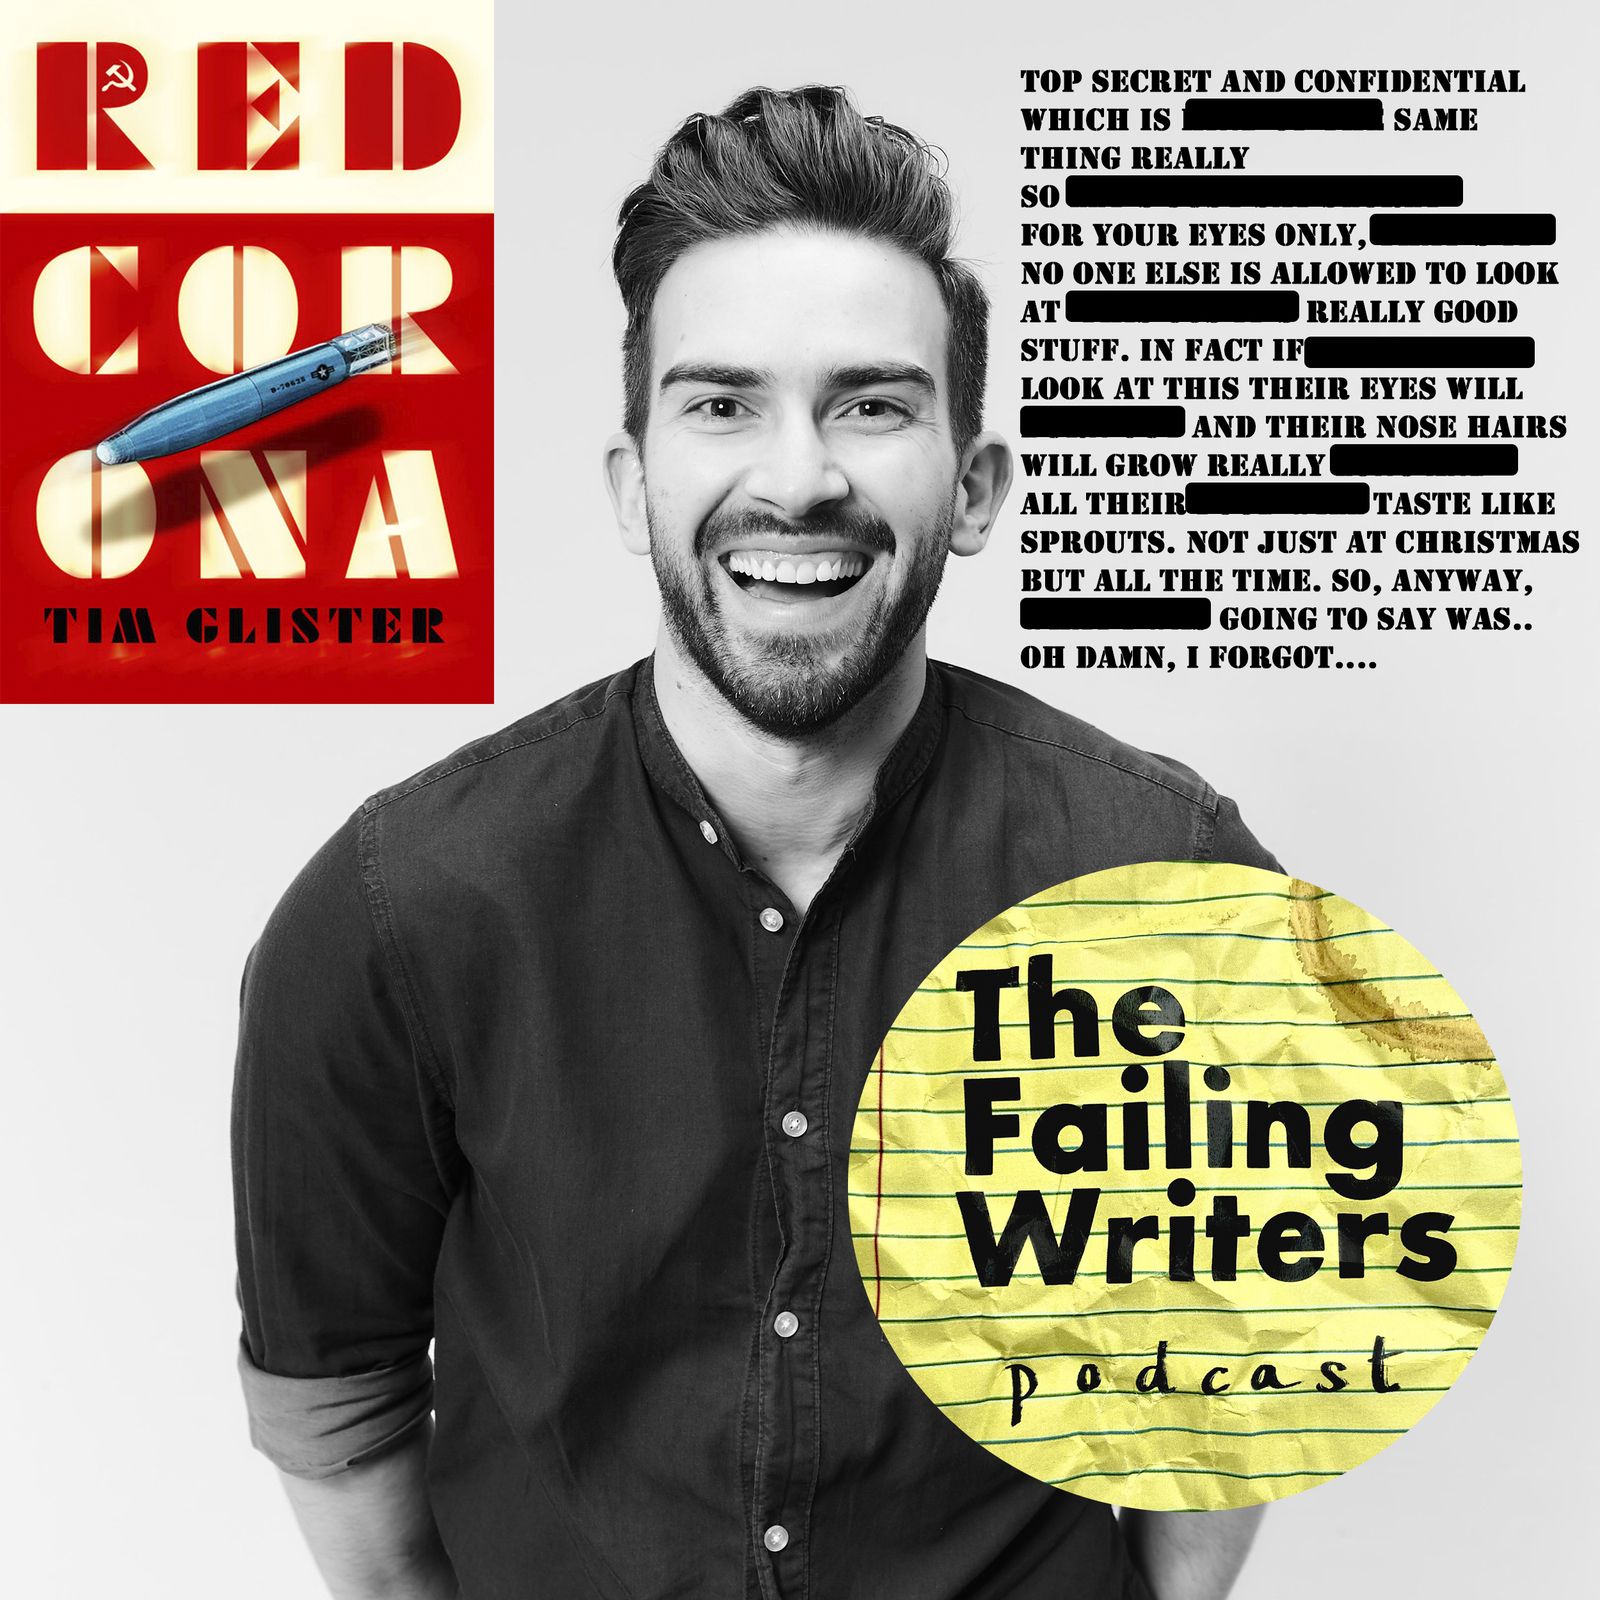 S1 Ep30: An interview with Tim Glister - author of "Red Corona" Image